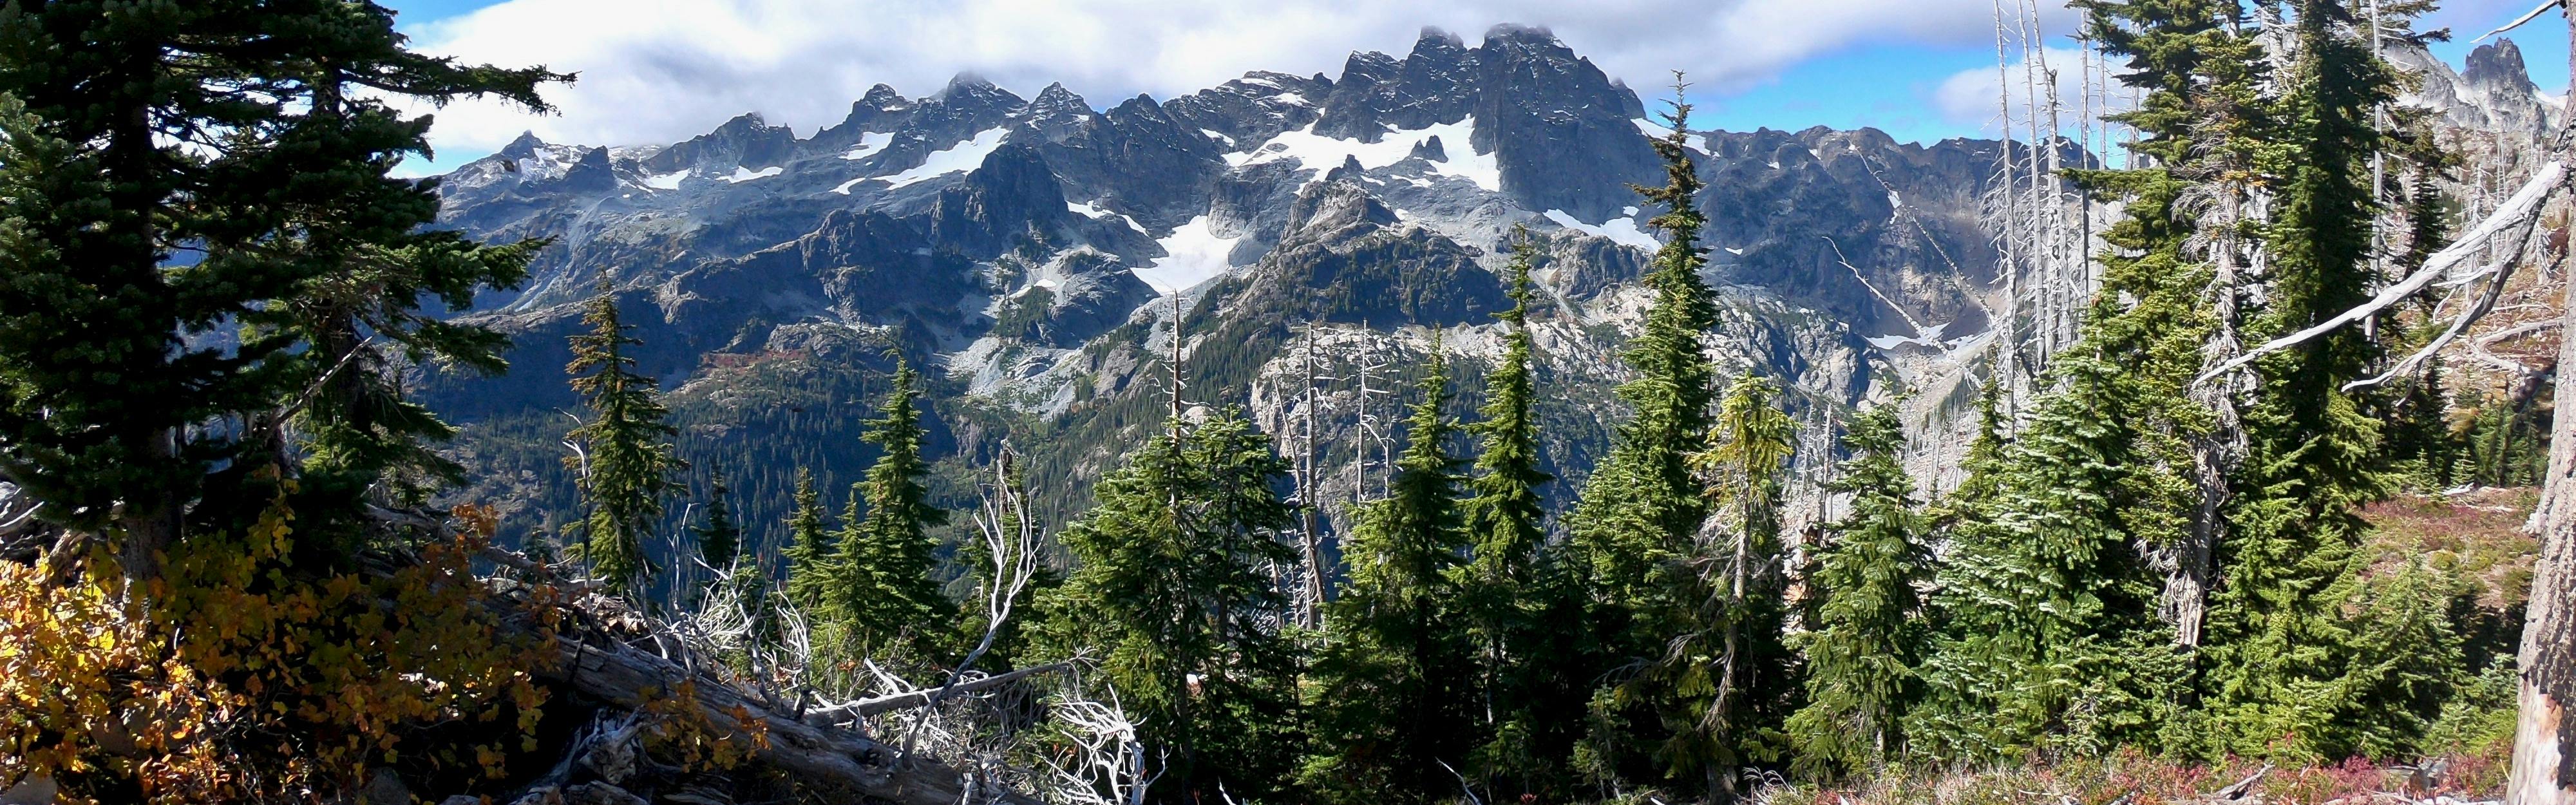 Trees and mountains on the Pacific Crest Trail